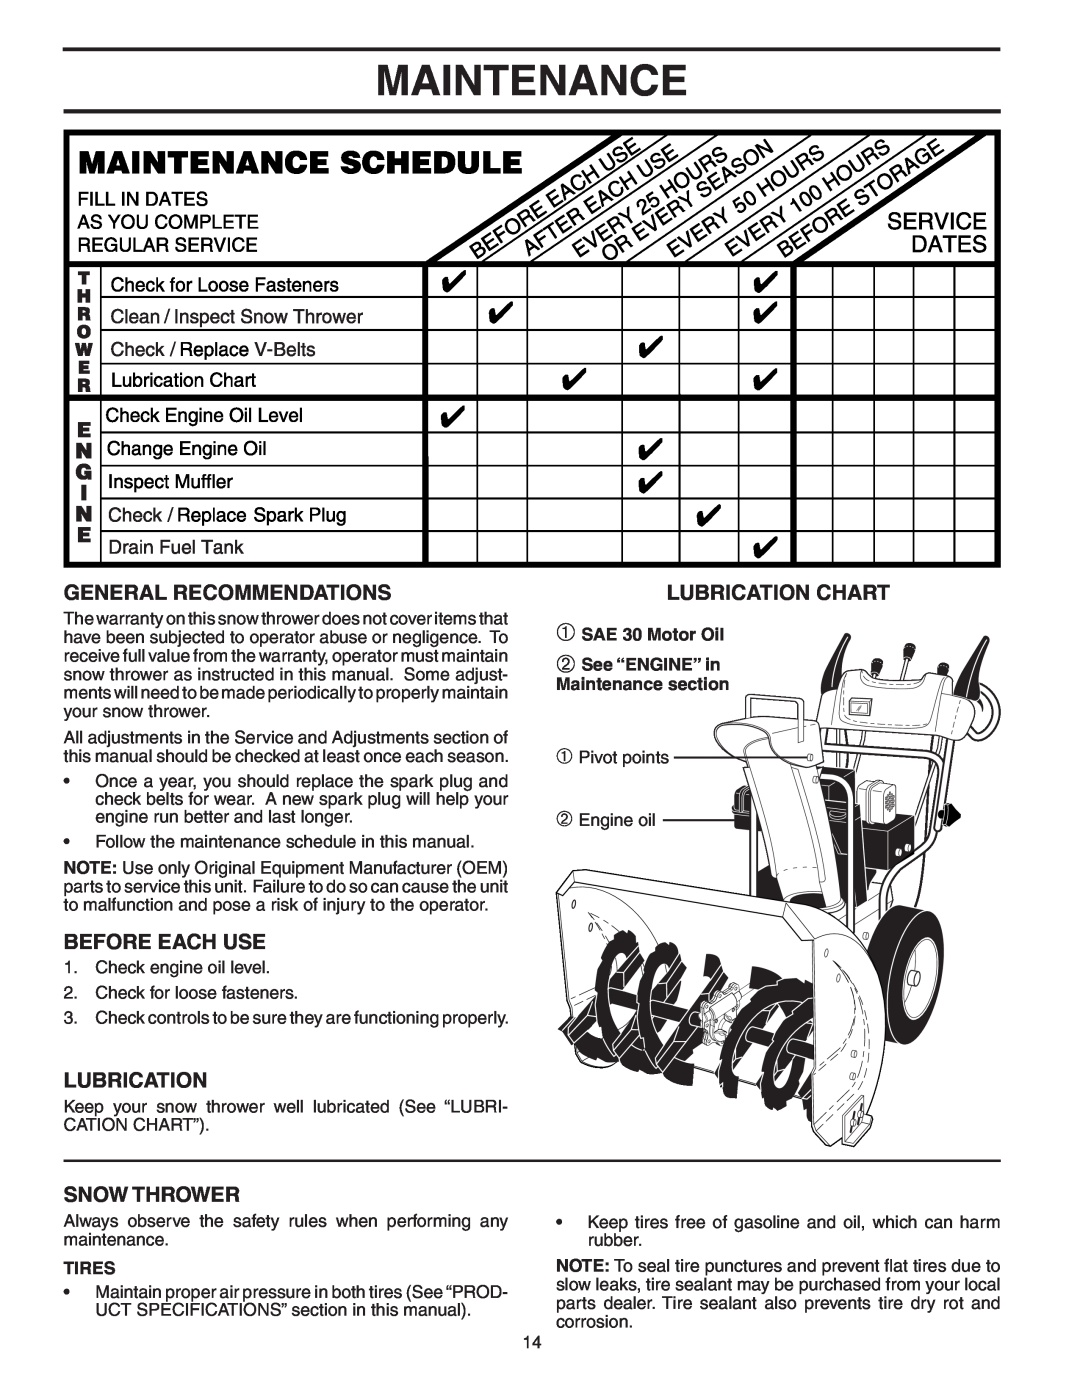 Poulan 183616 Maintenance, General Recommendations, Before Each Use, Snow Thrower, Lubrication Chart, Tires 